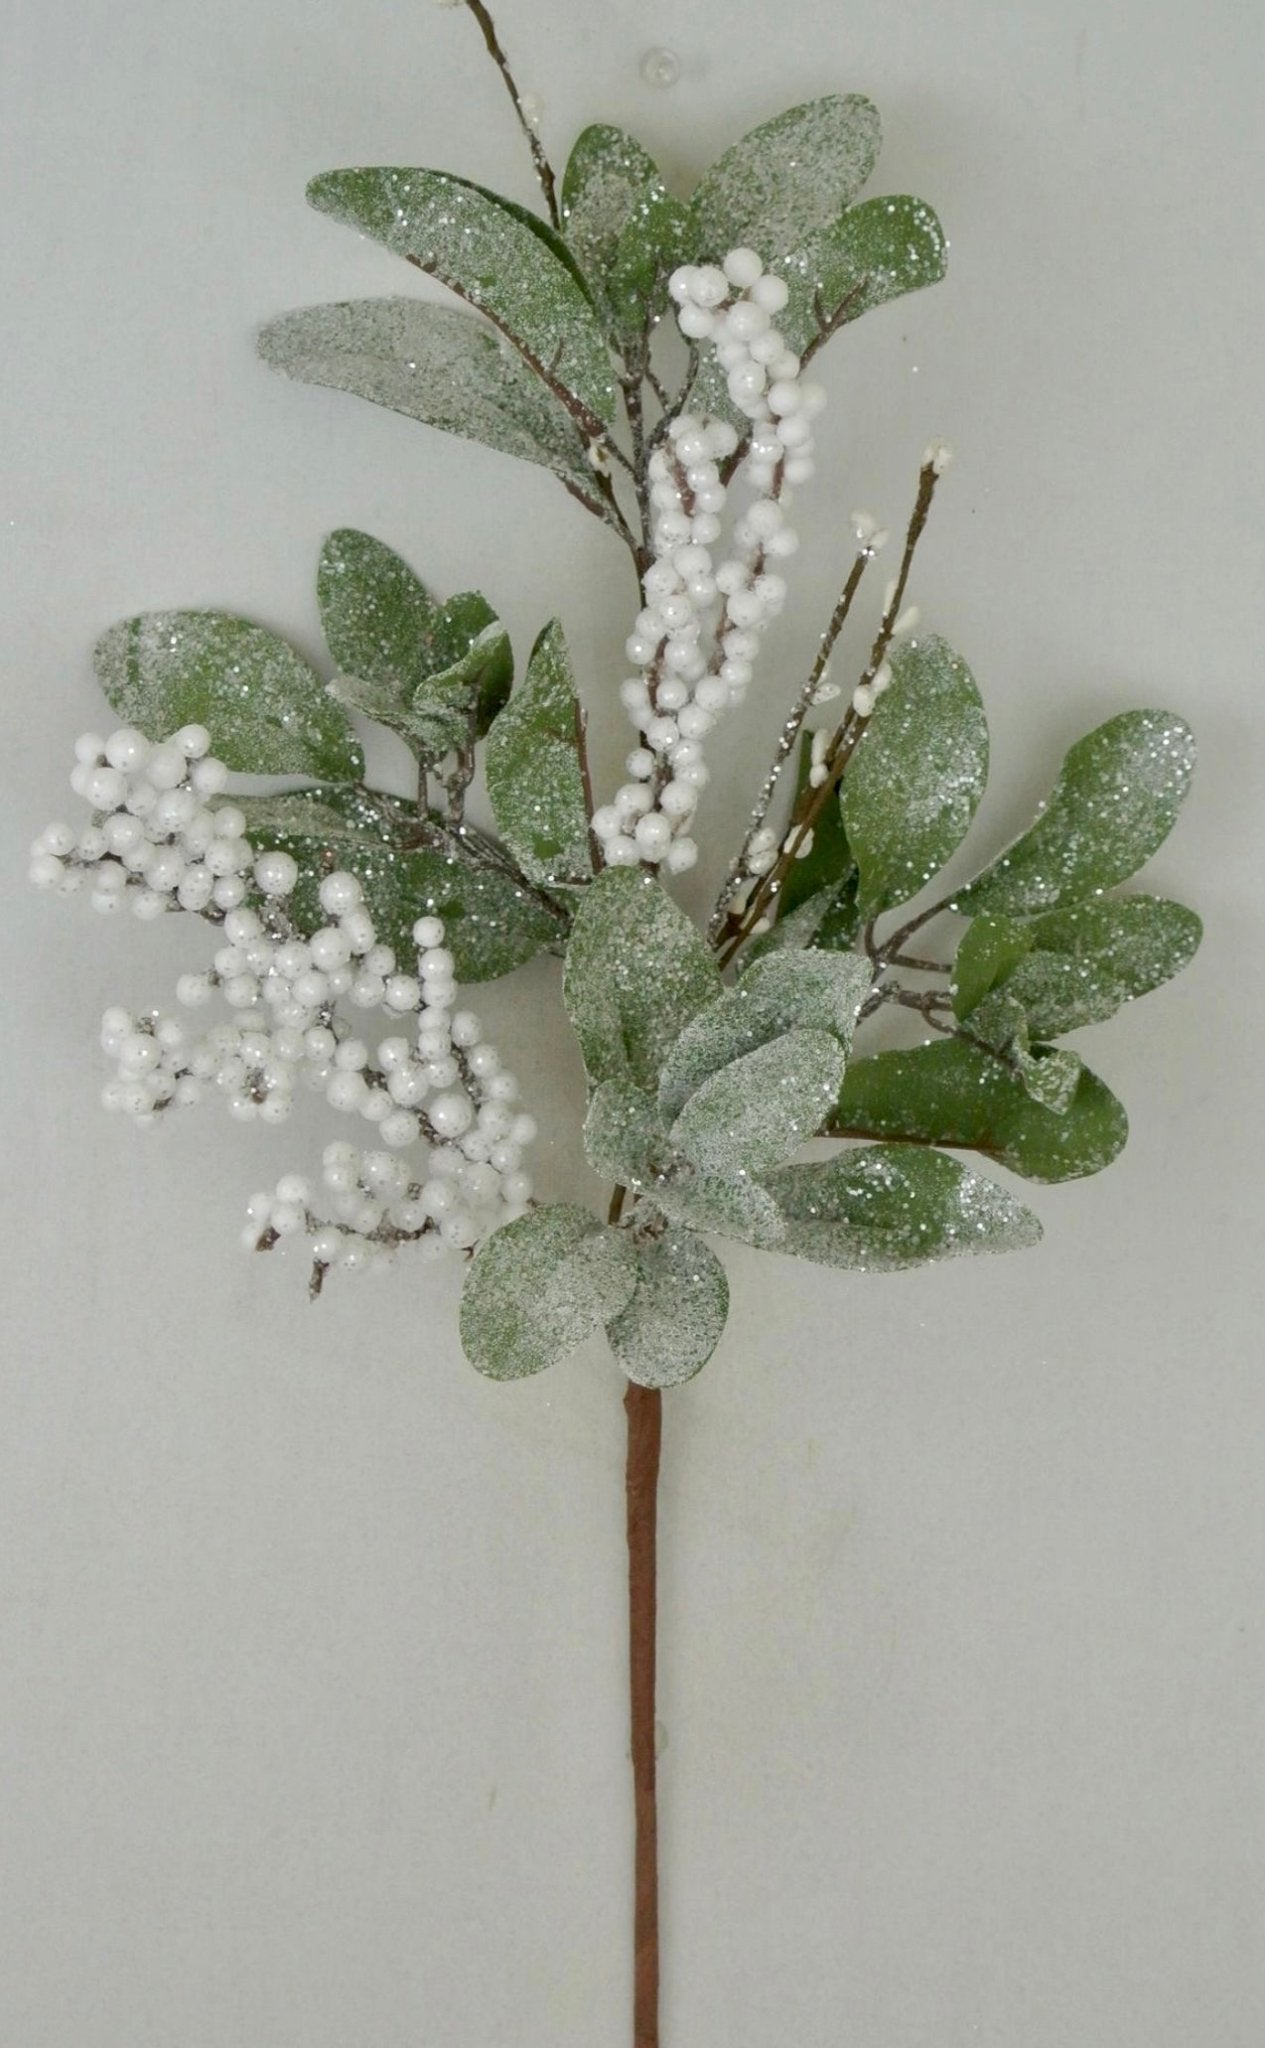 Snowy berry and leaves pick - Greenery Market62063